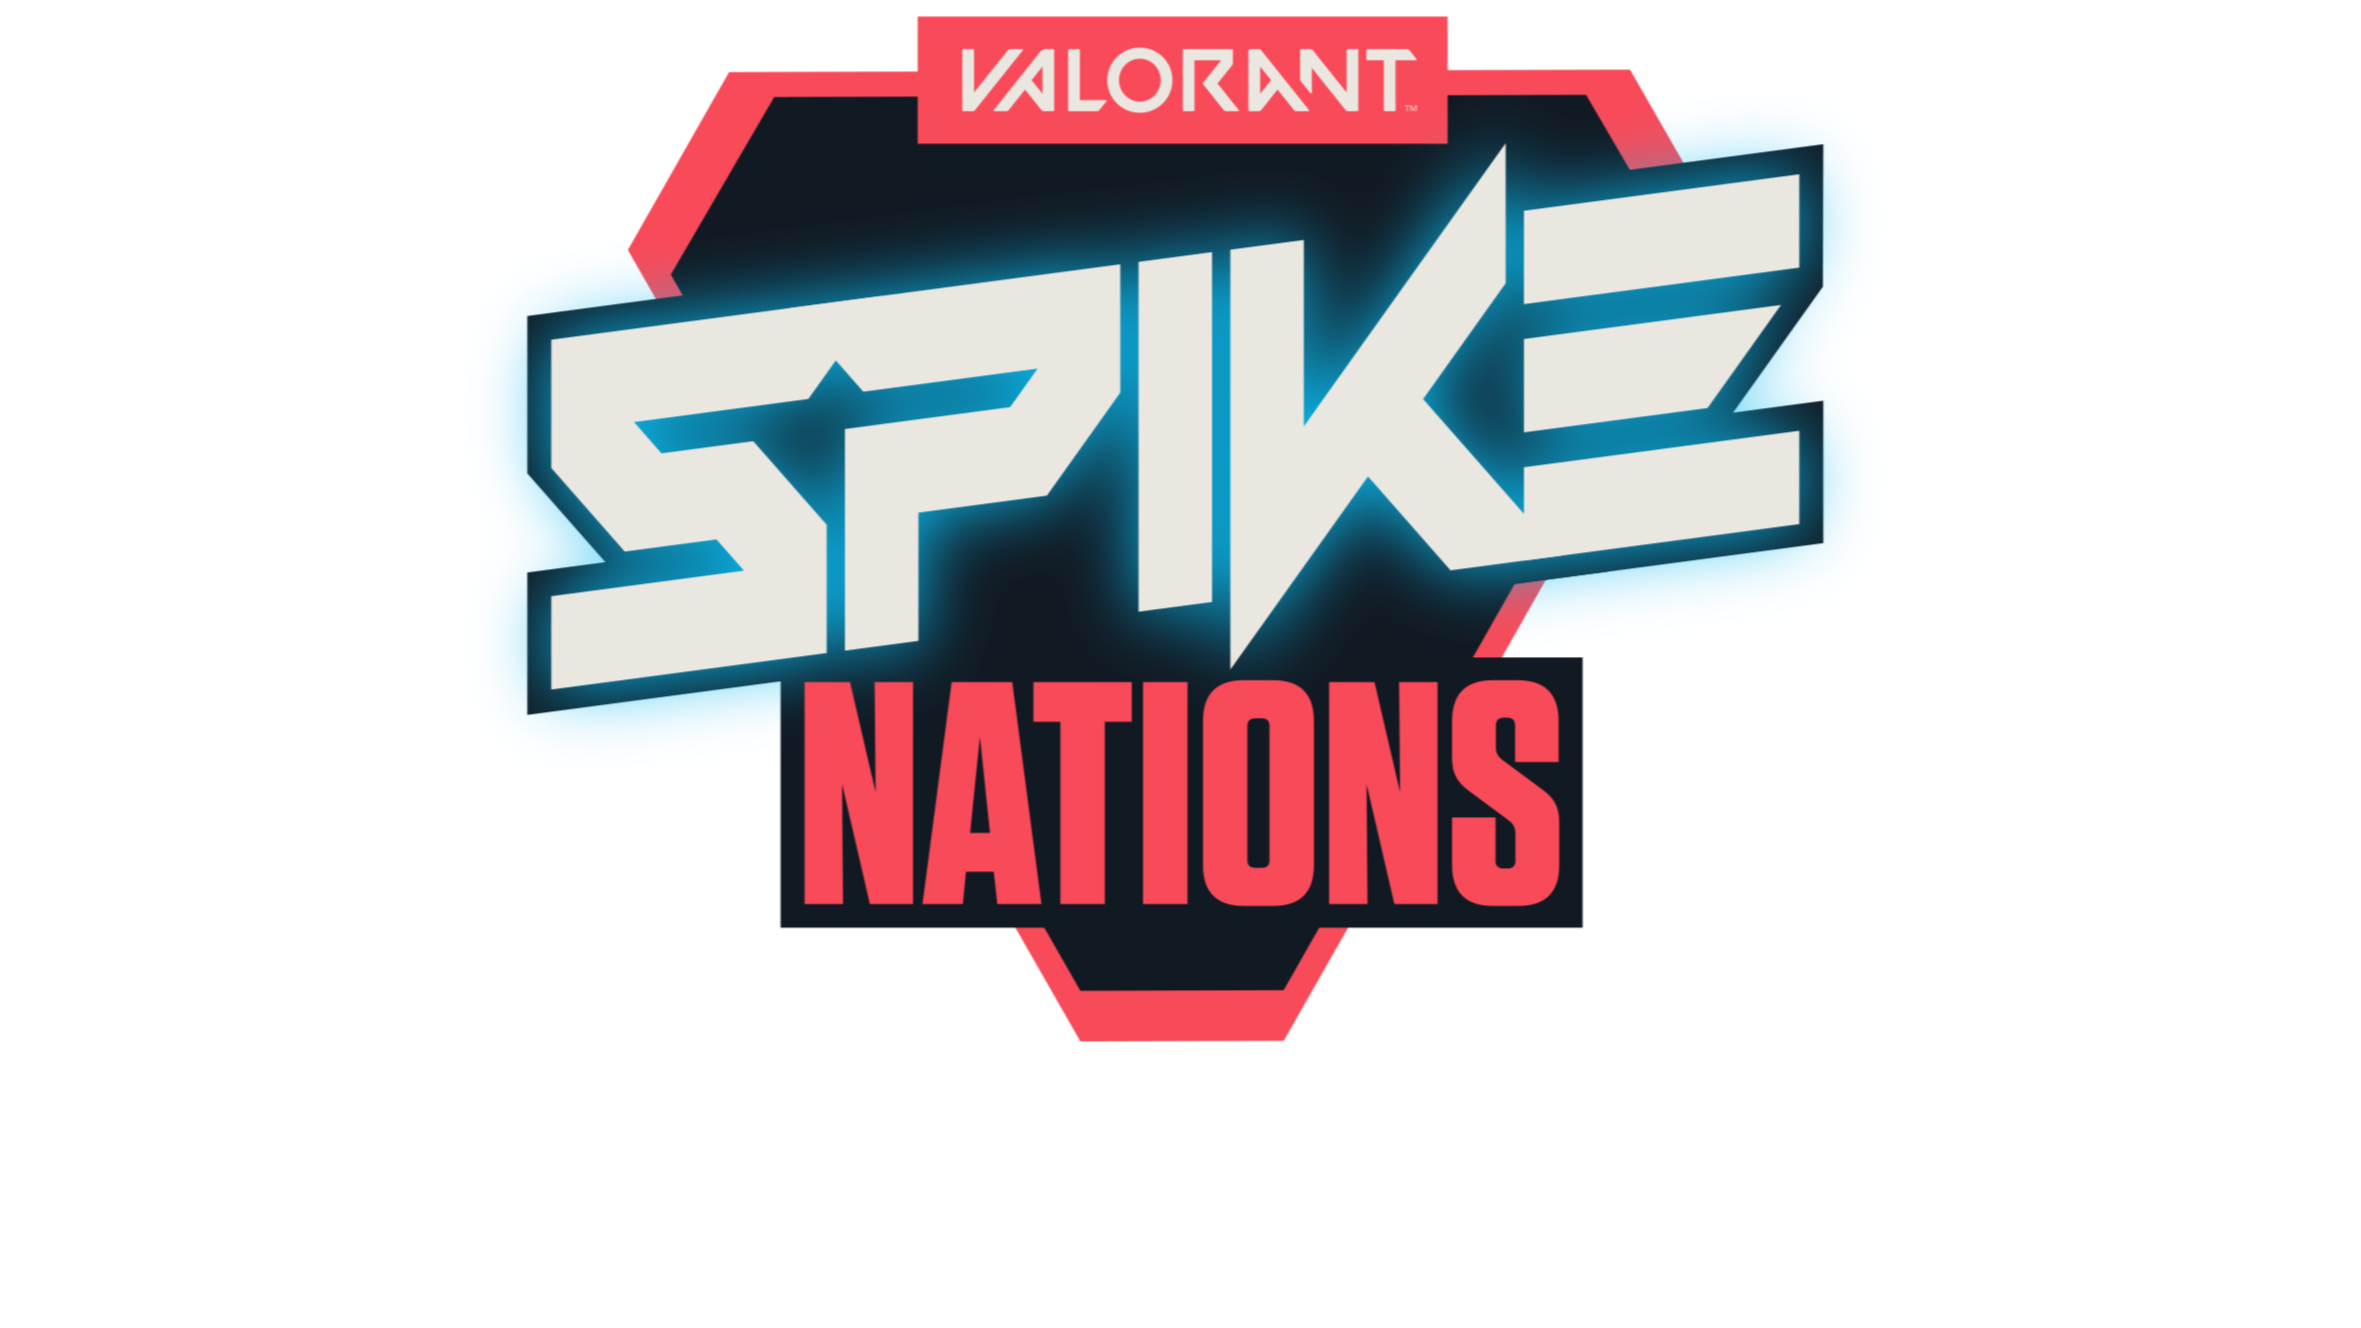 VALORANT Spike Nations